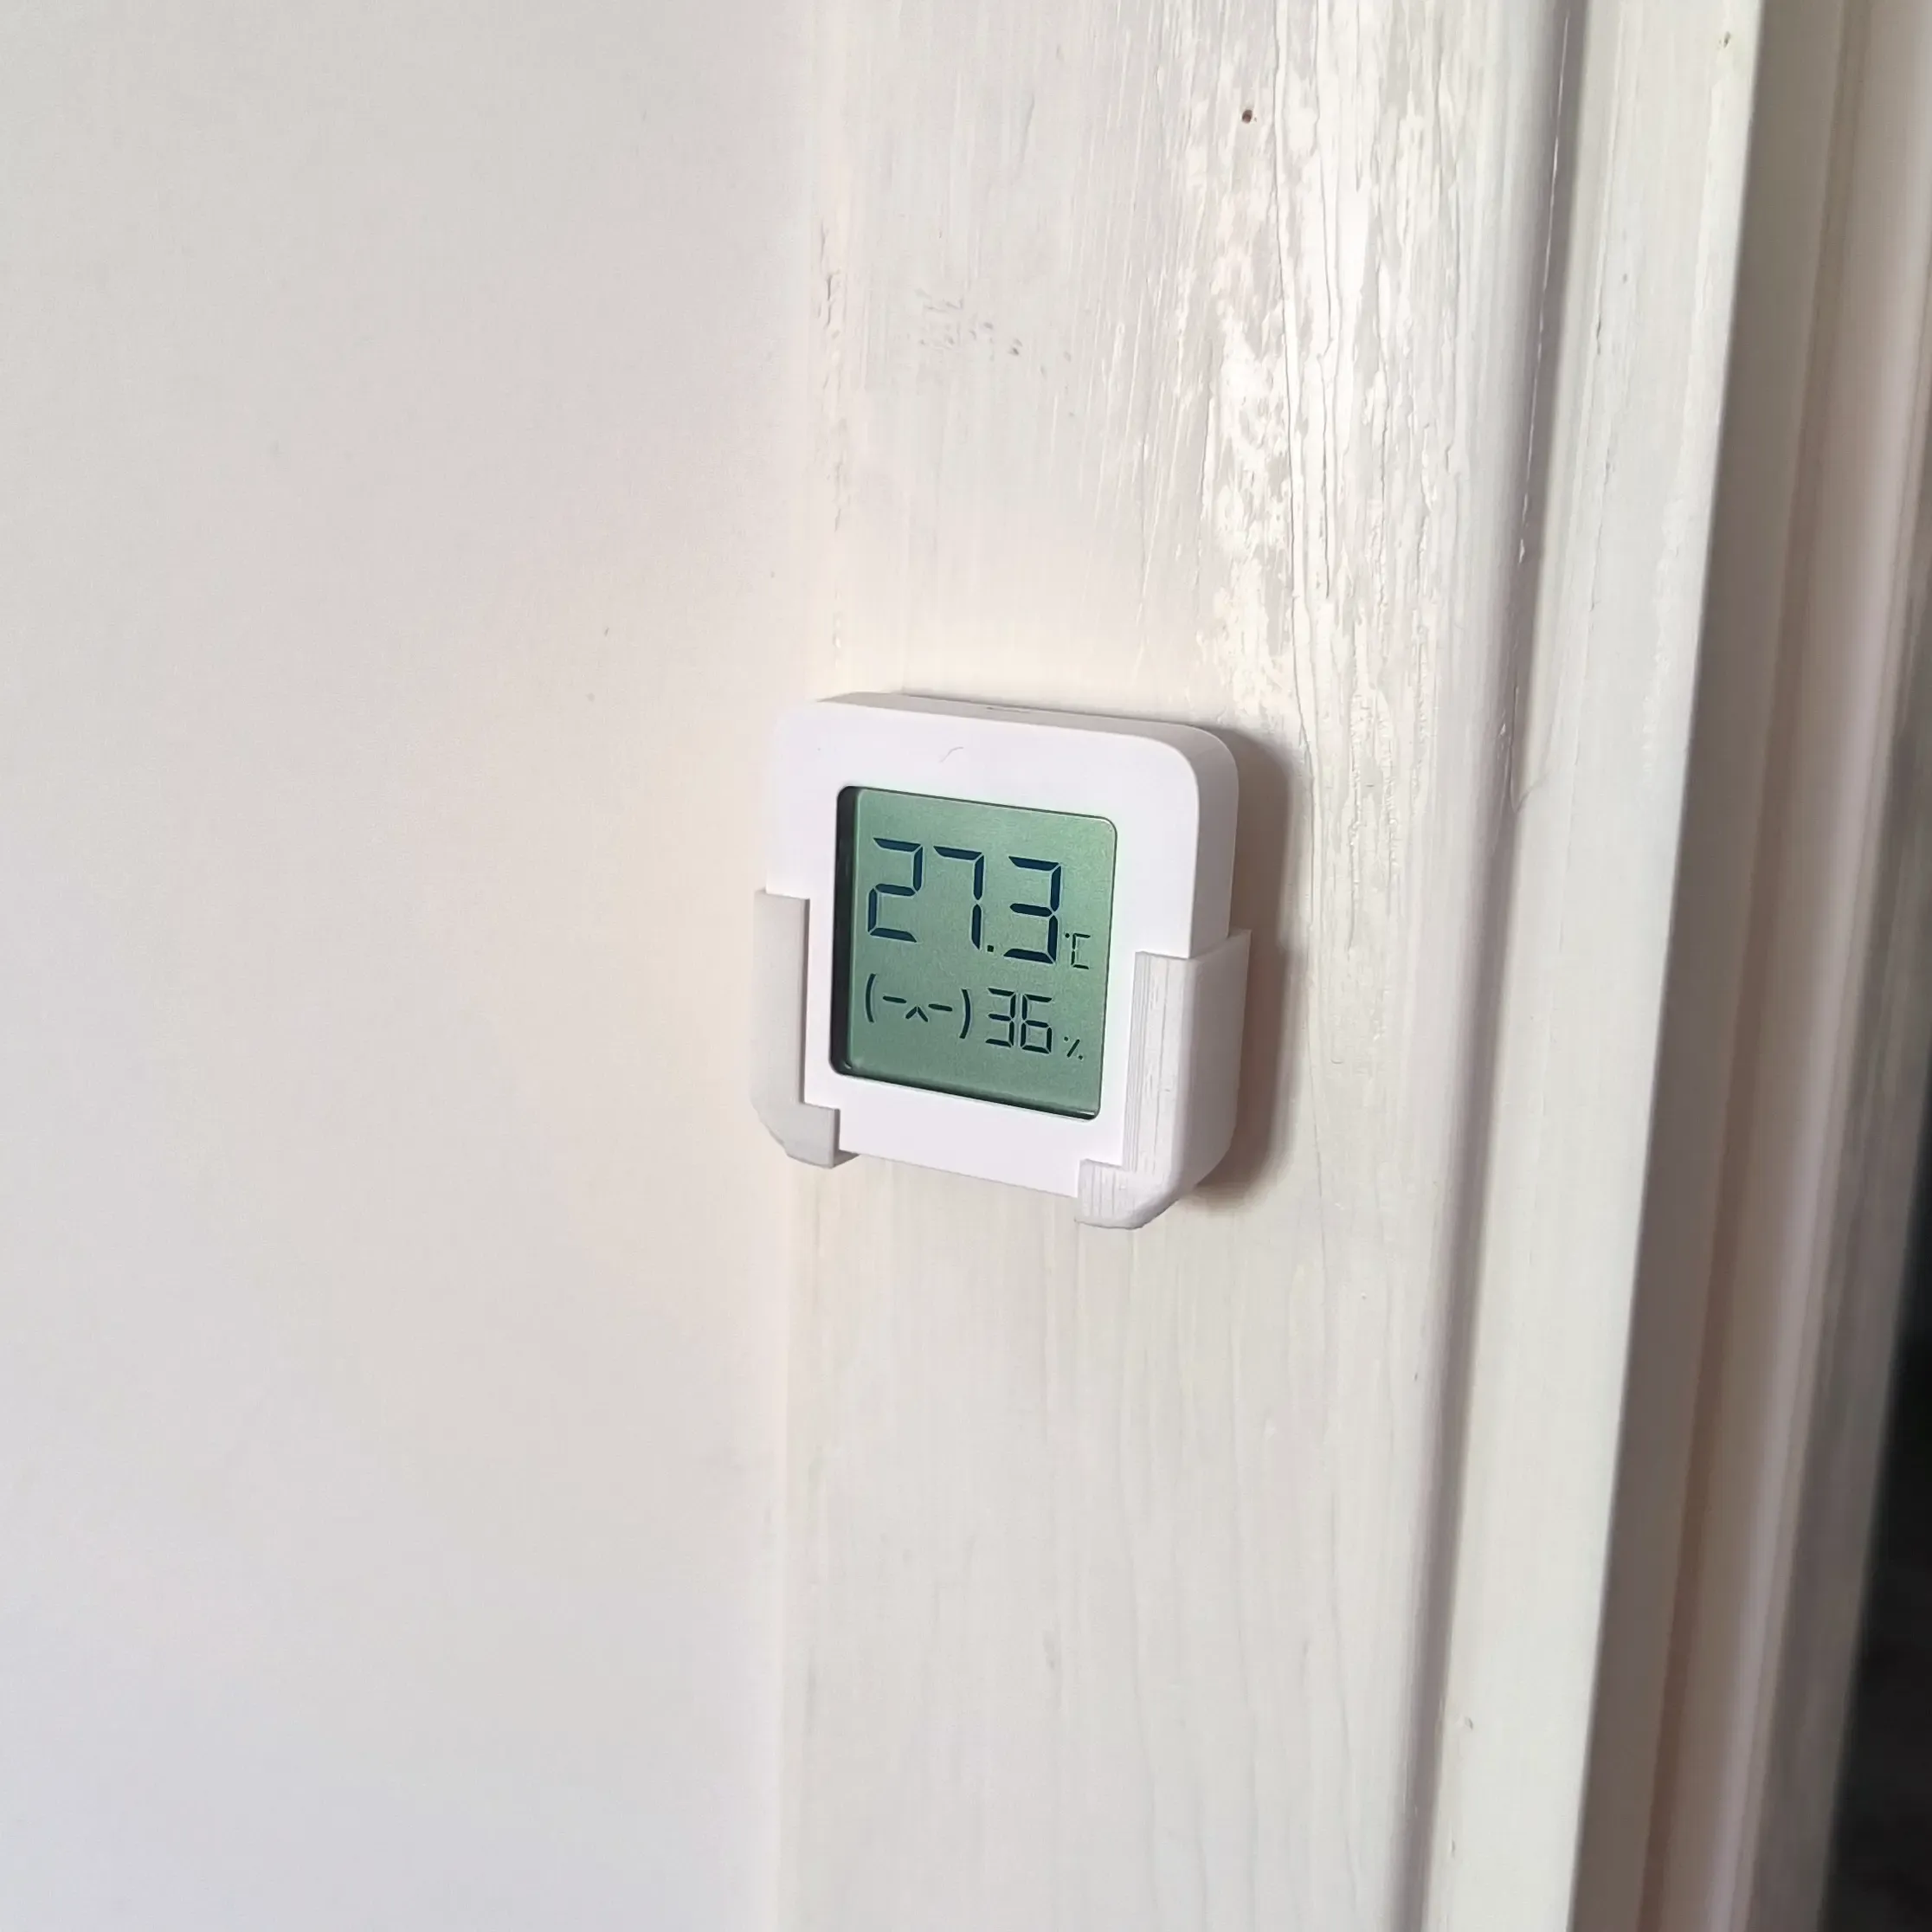 XIAOMI THERMOMETER HOLDER